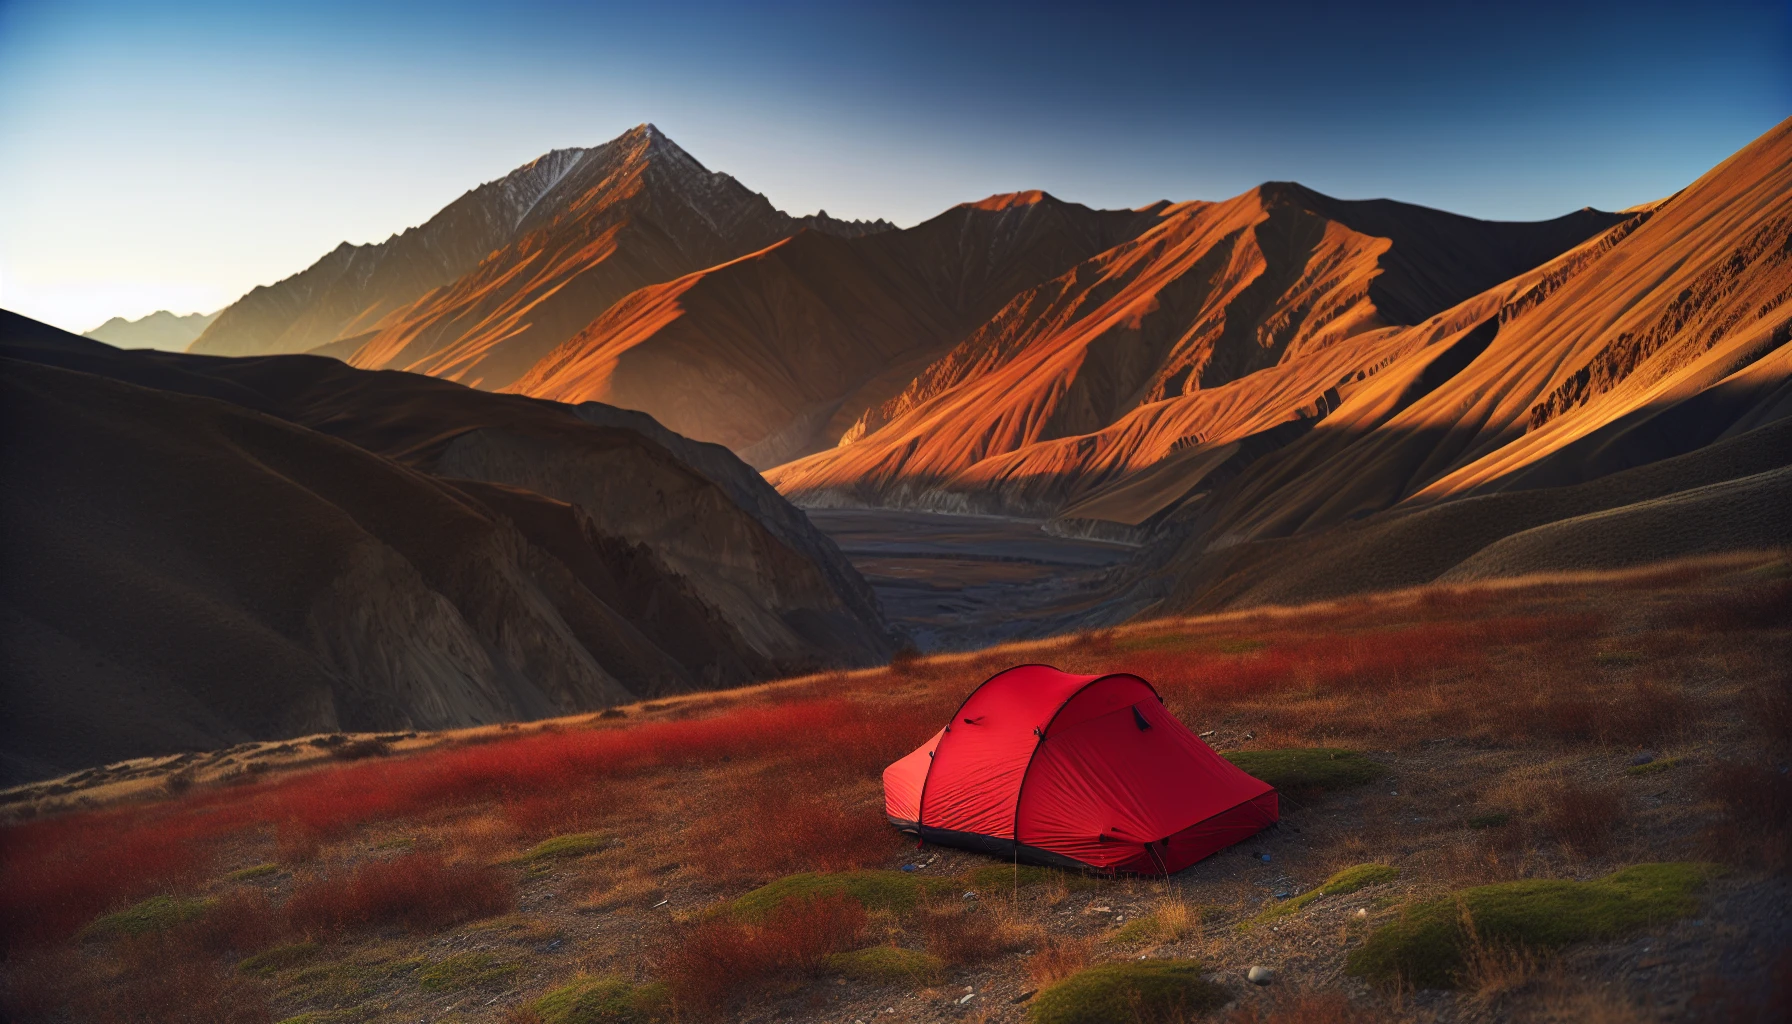 Backpacking tent pitched in a scenic mountainous area